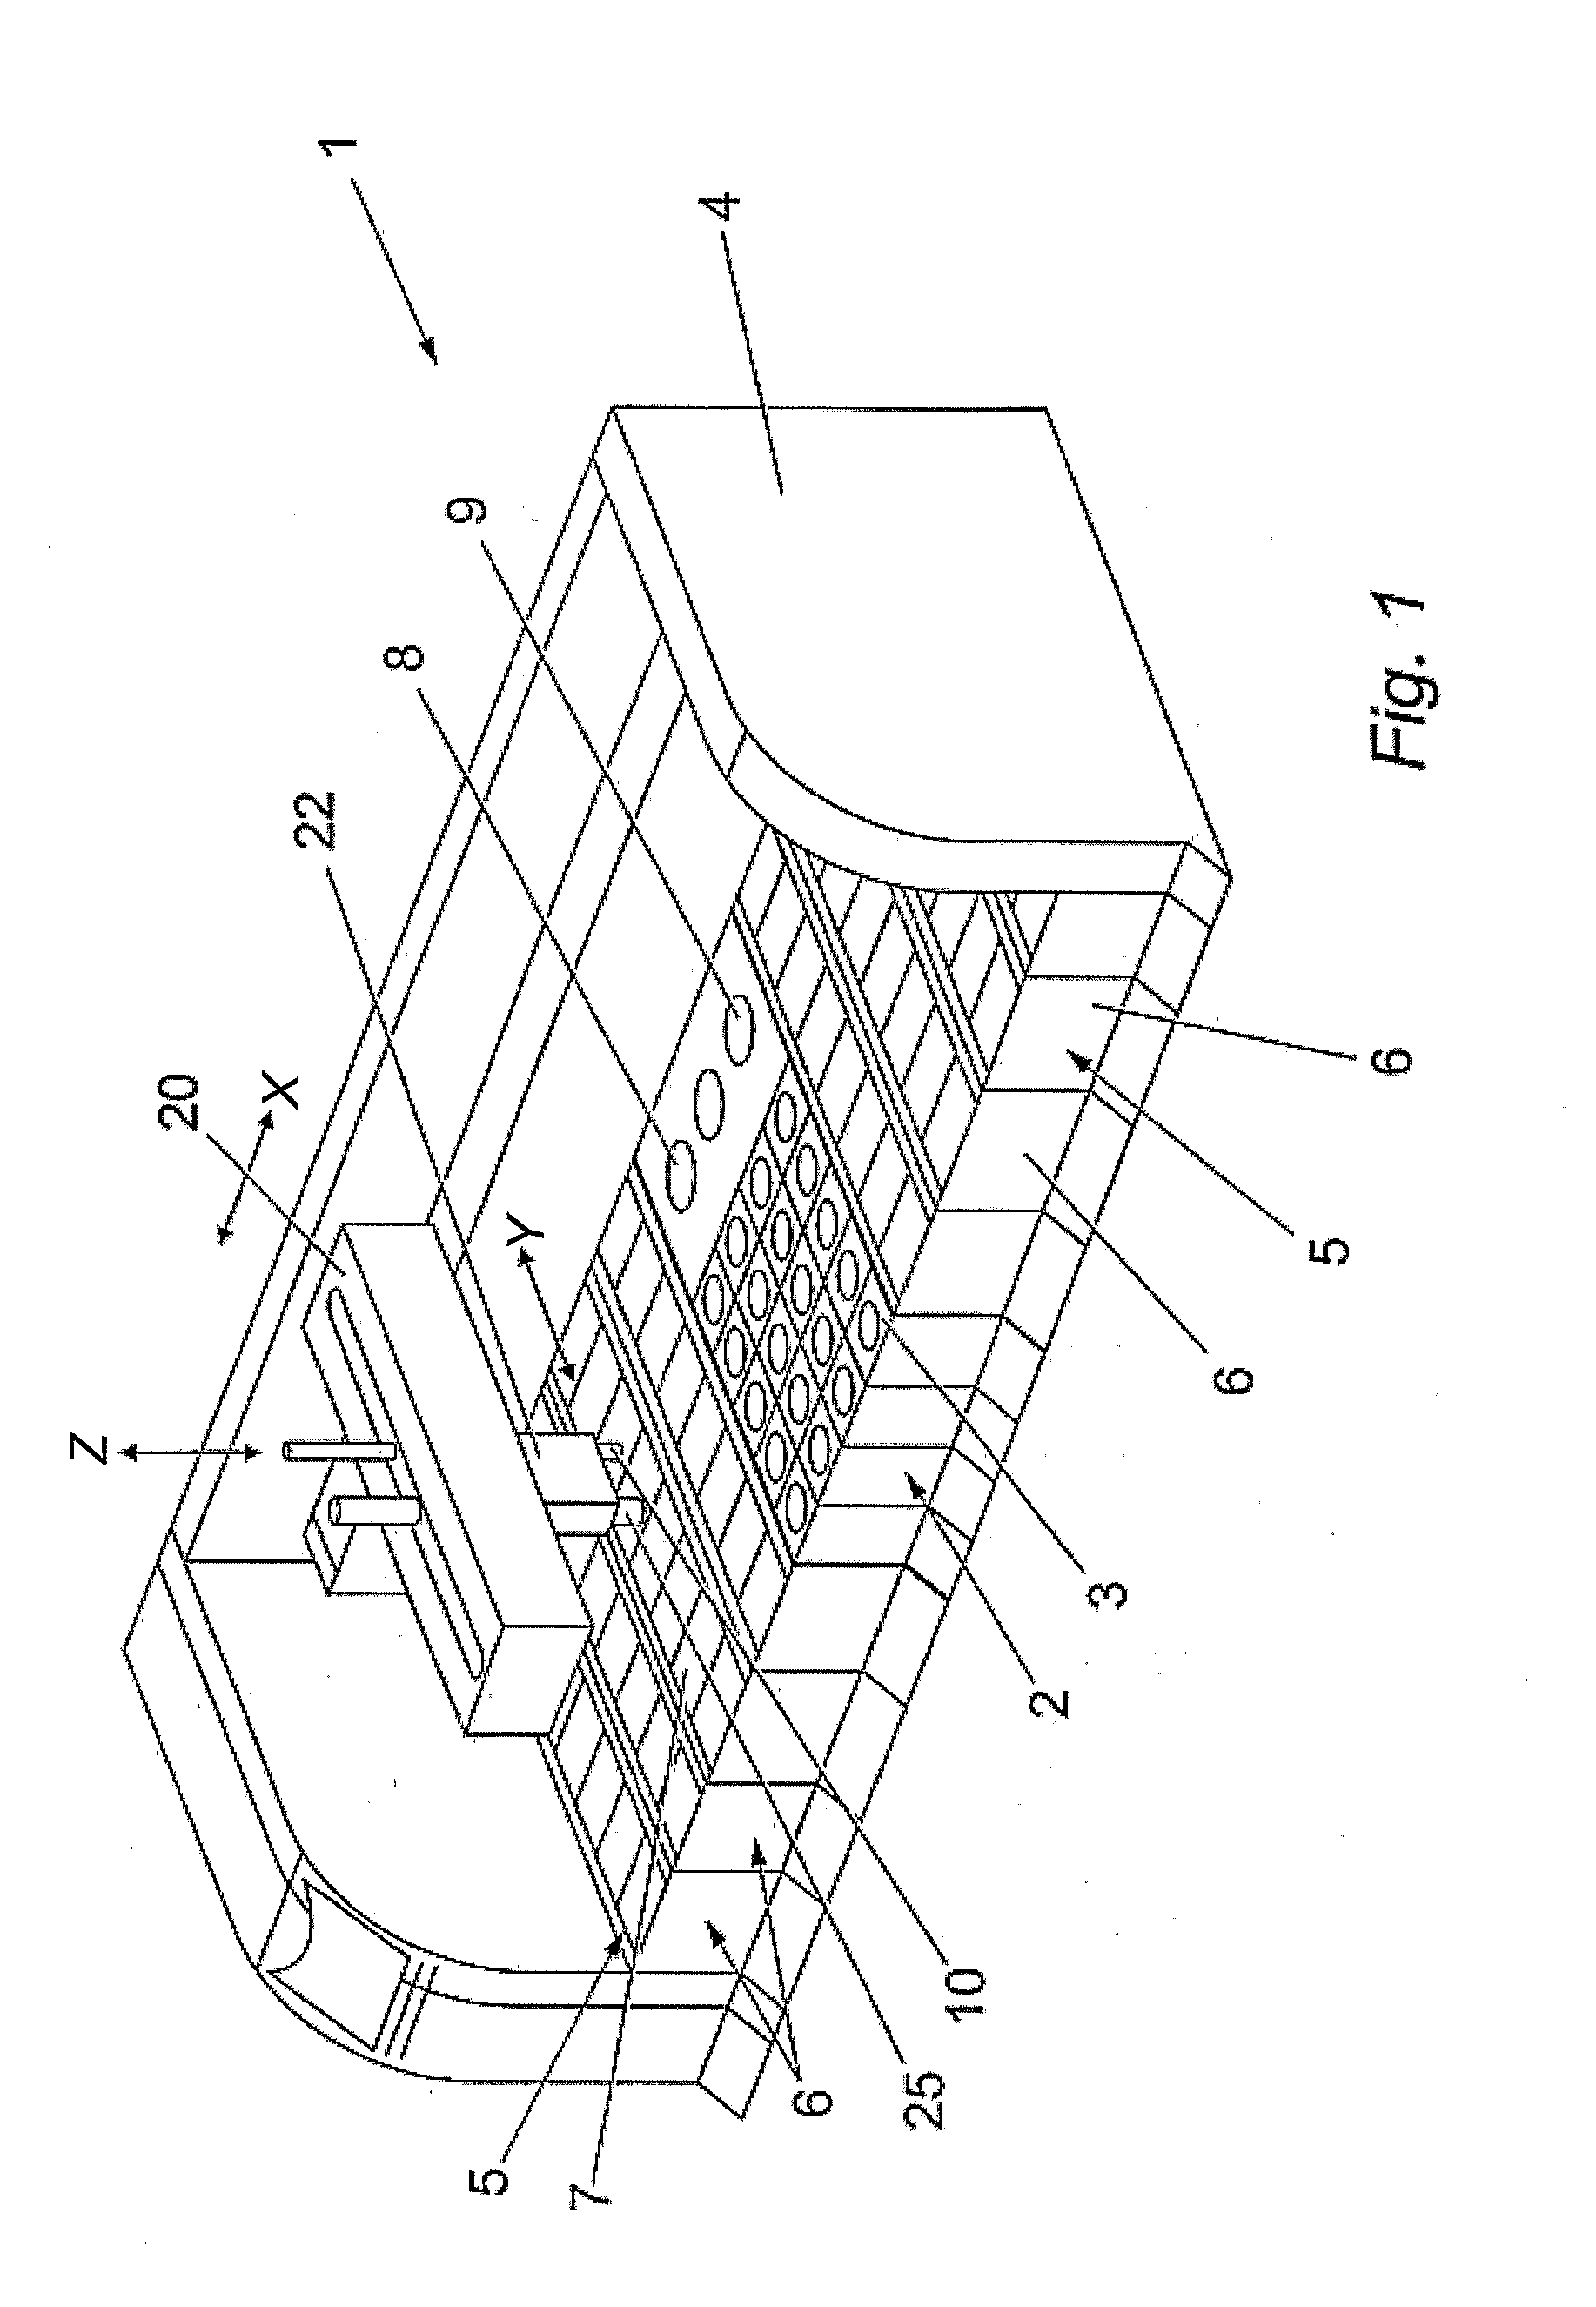 Reagent Delivery System, Dispensing Device and Container for a Biological Staining Apparatus